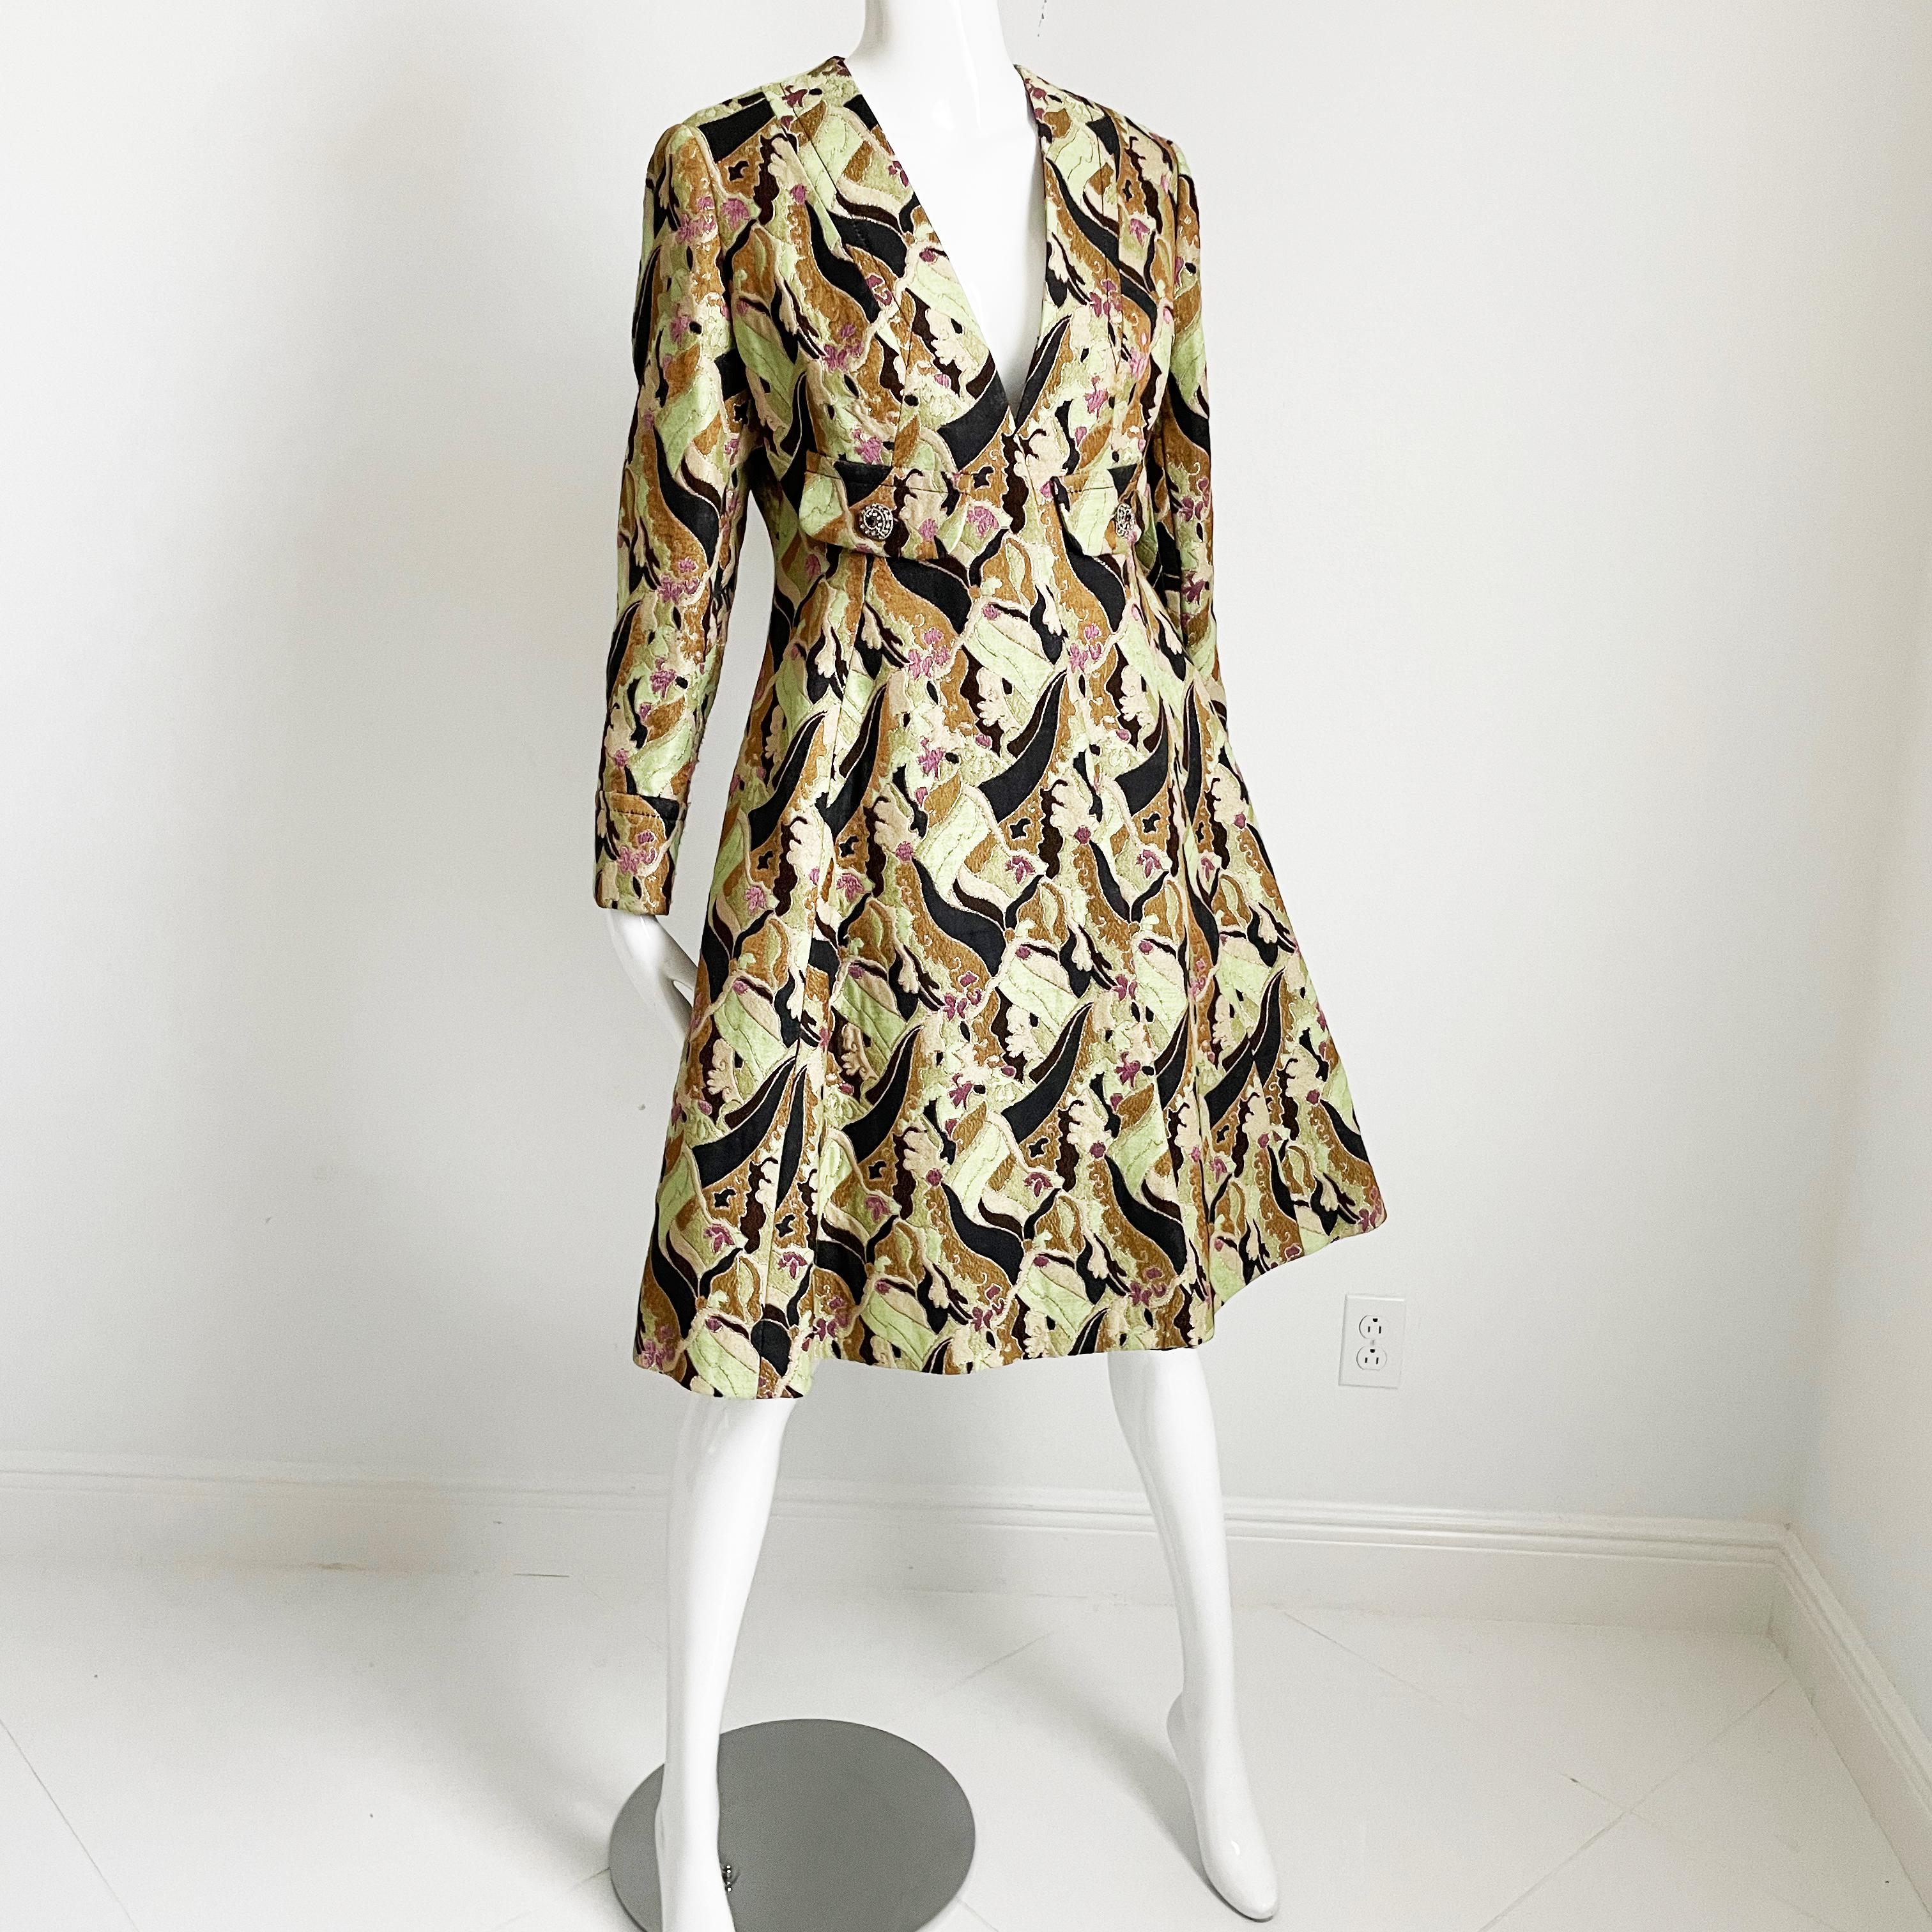 James Galanos Brocade Coat or Dress Amelia Gray Boutique Beverly Hills 1960s For Sale 2